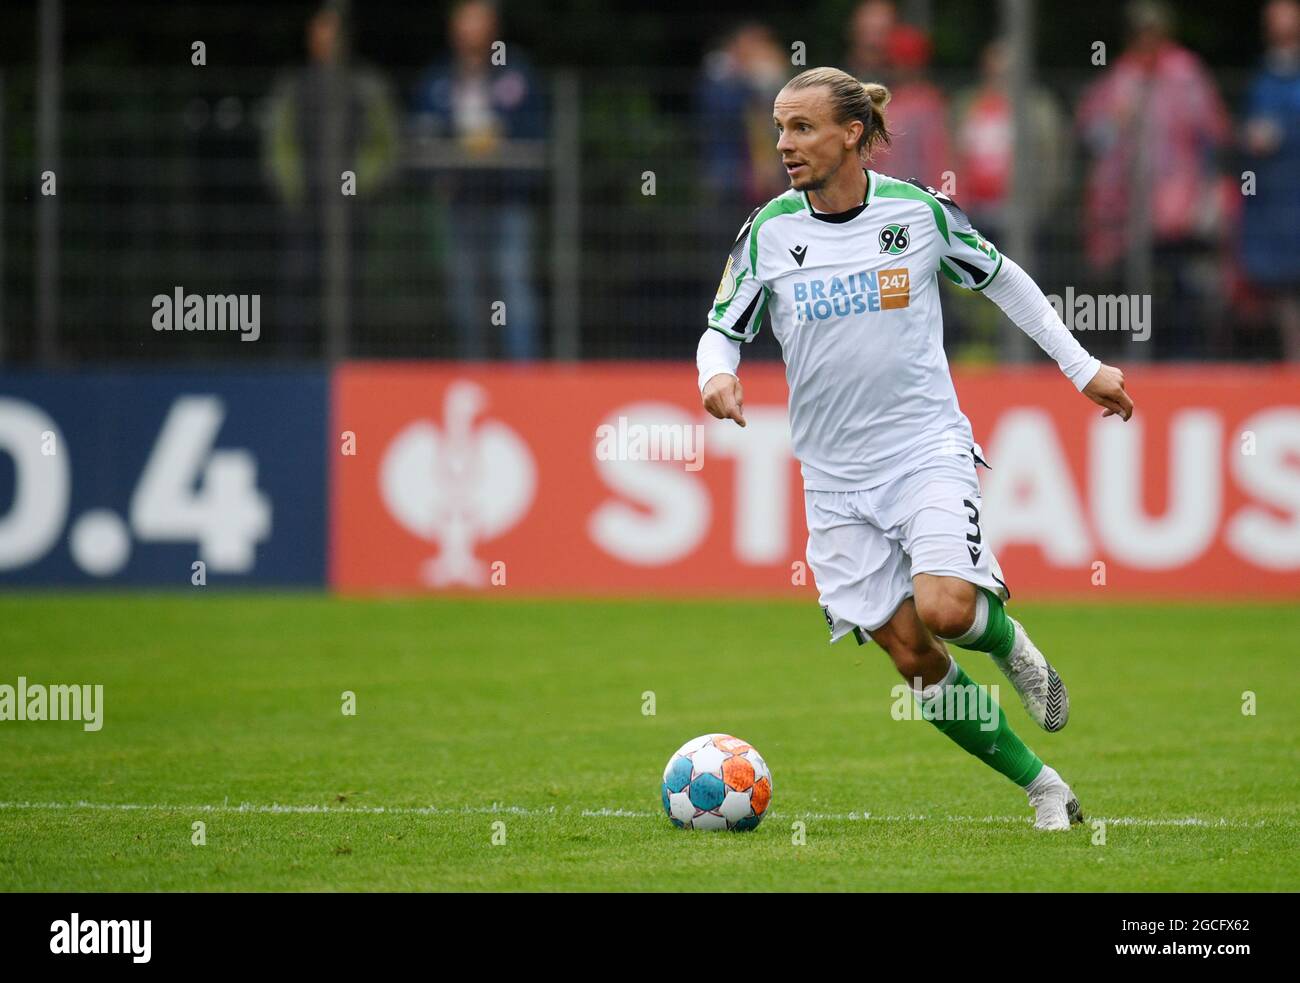 Norderstedt, Germany. 07th Aug, 2021. Football: DFB Cup, Eintracht Norderstedt - Hannover 96, 1st round at Edmund-Plambeck-Stadion. Hannover's Niklas Hult plays the ball. Credit: Daniel Reinhardt/dpa - IMPORTANT NOTE: In accordance with the regulations of the DFL Deutsche Fußball Liga and/or the DFB Deutscher Fußball-Bund, it is prohibited to use or have used photographs taken in the stadium and/or of the match in the form of sequence pictures and/or video-like photo series./dpa/Alamy Live News Stock Photo